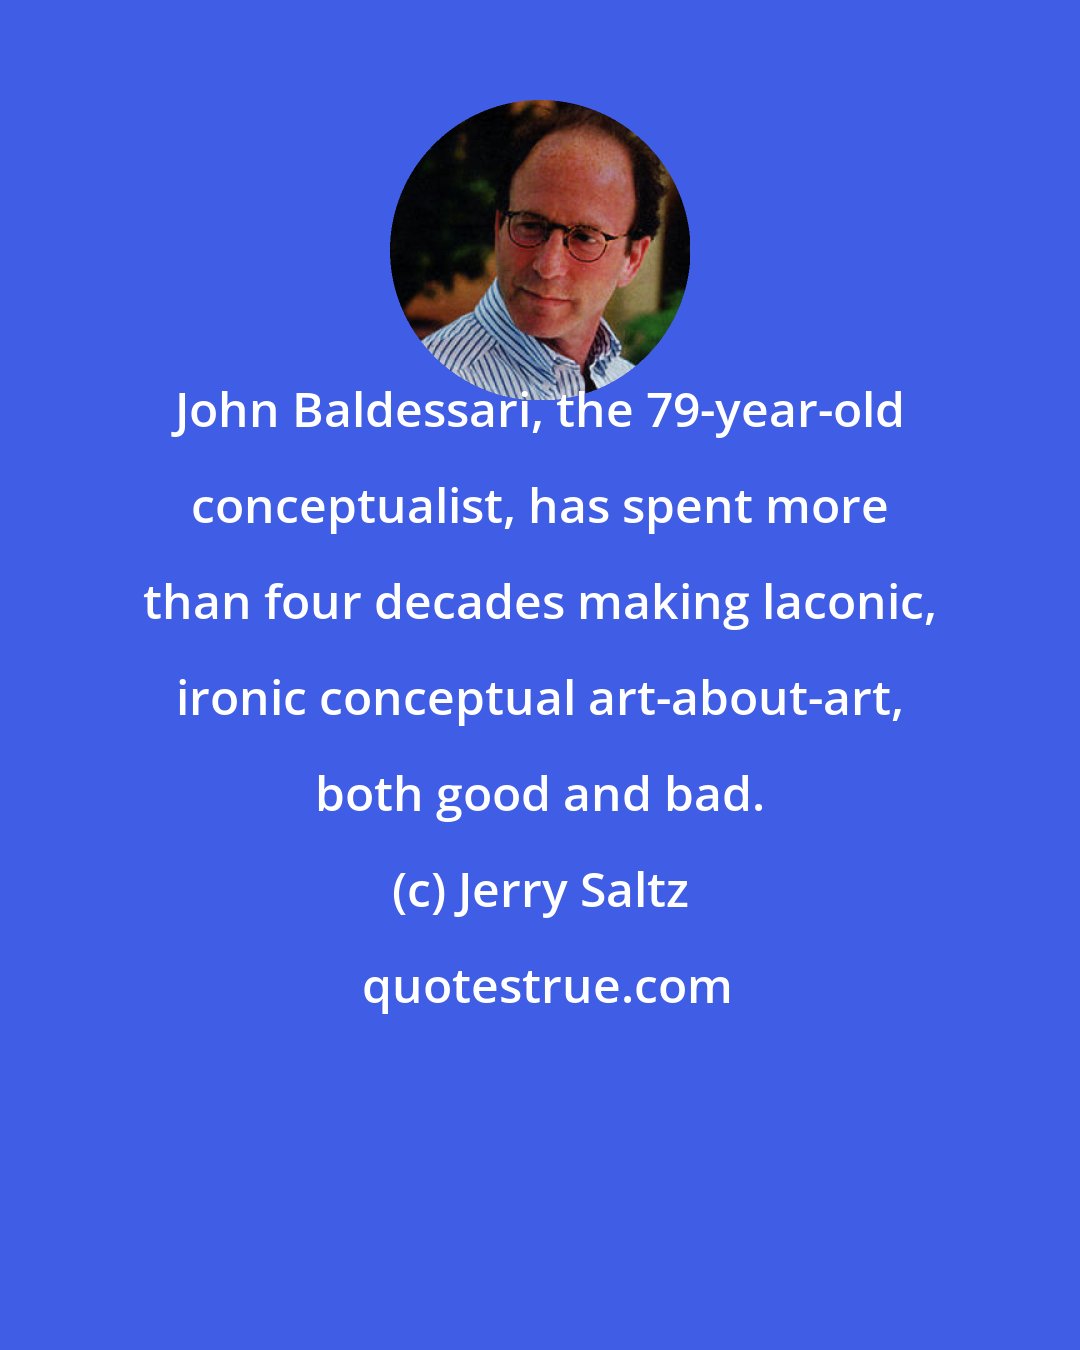 Jerry Saltz: John Baldessari, the 79-year-old conceptualist, has spent more than four decades making laconic, ironic conceptual art-about-art, both good and bad.